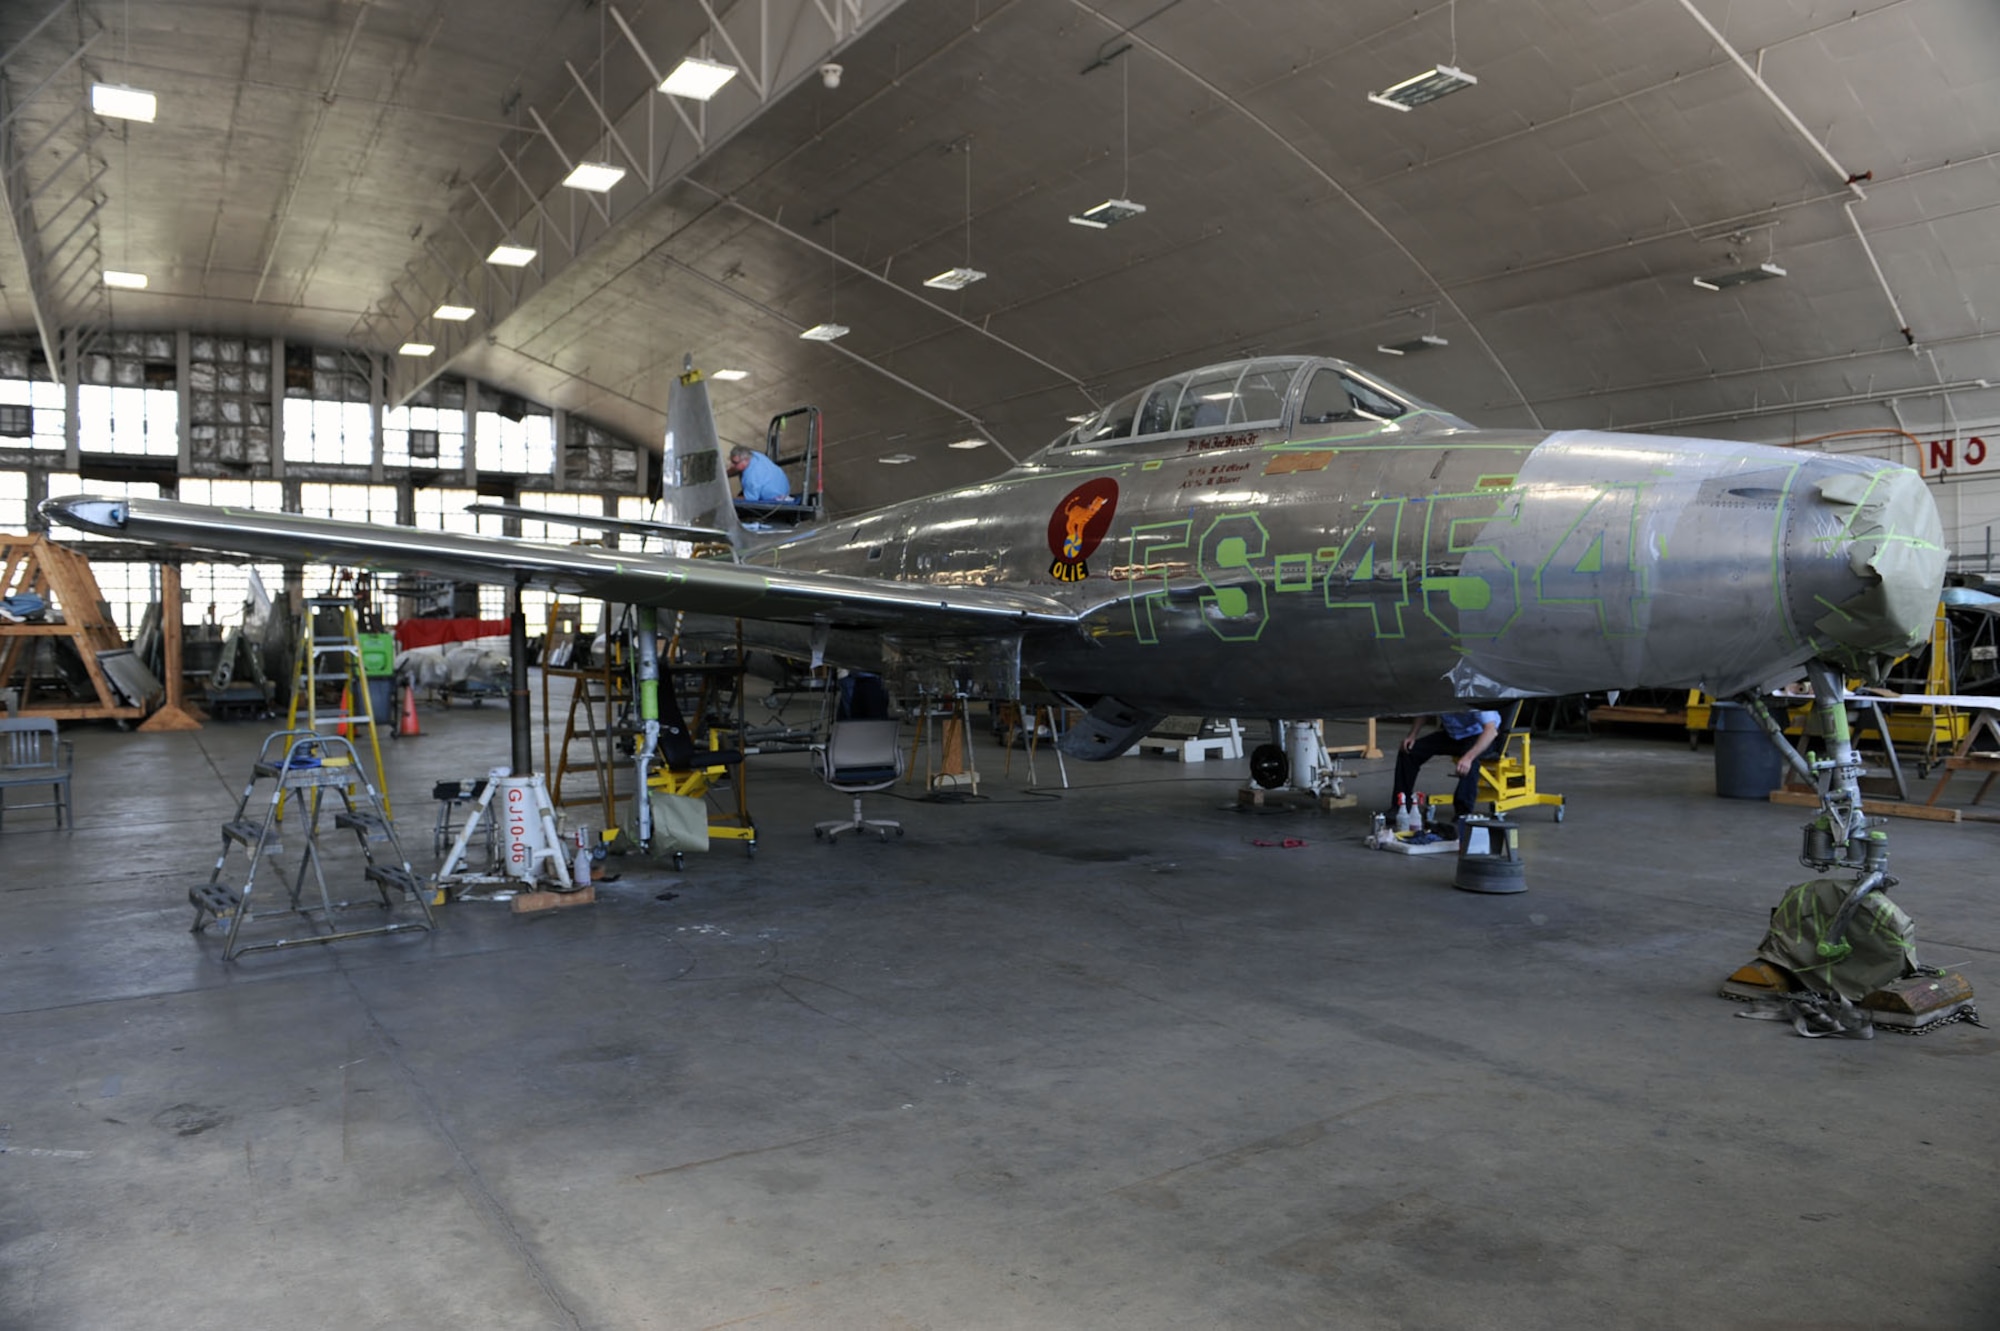 Dayton, Ohio (04/2010) -- F-84 in the Restoration Hangar at the National Museum of the U.S. Air Force. (U.S. Air Force photo/Master Sgt. William Greer)